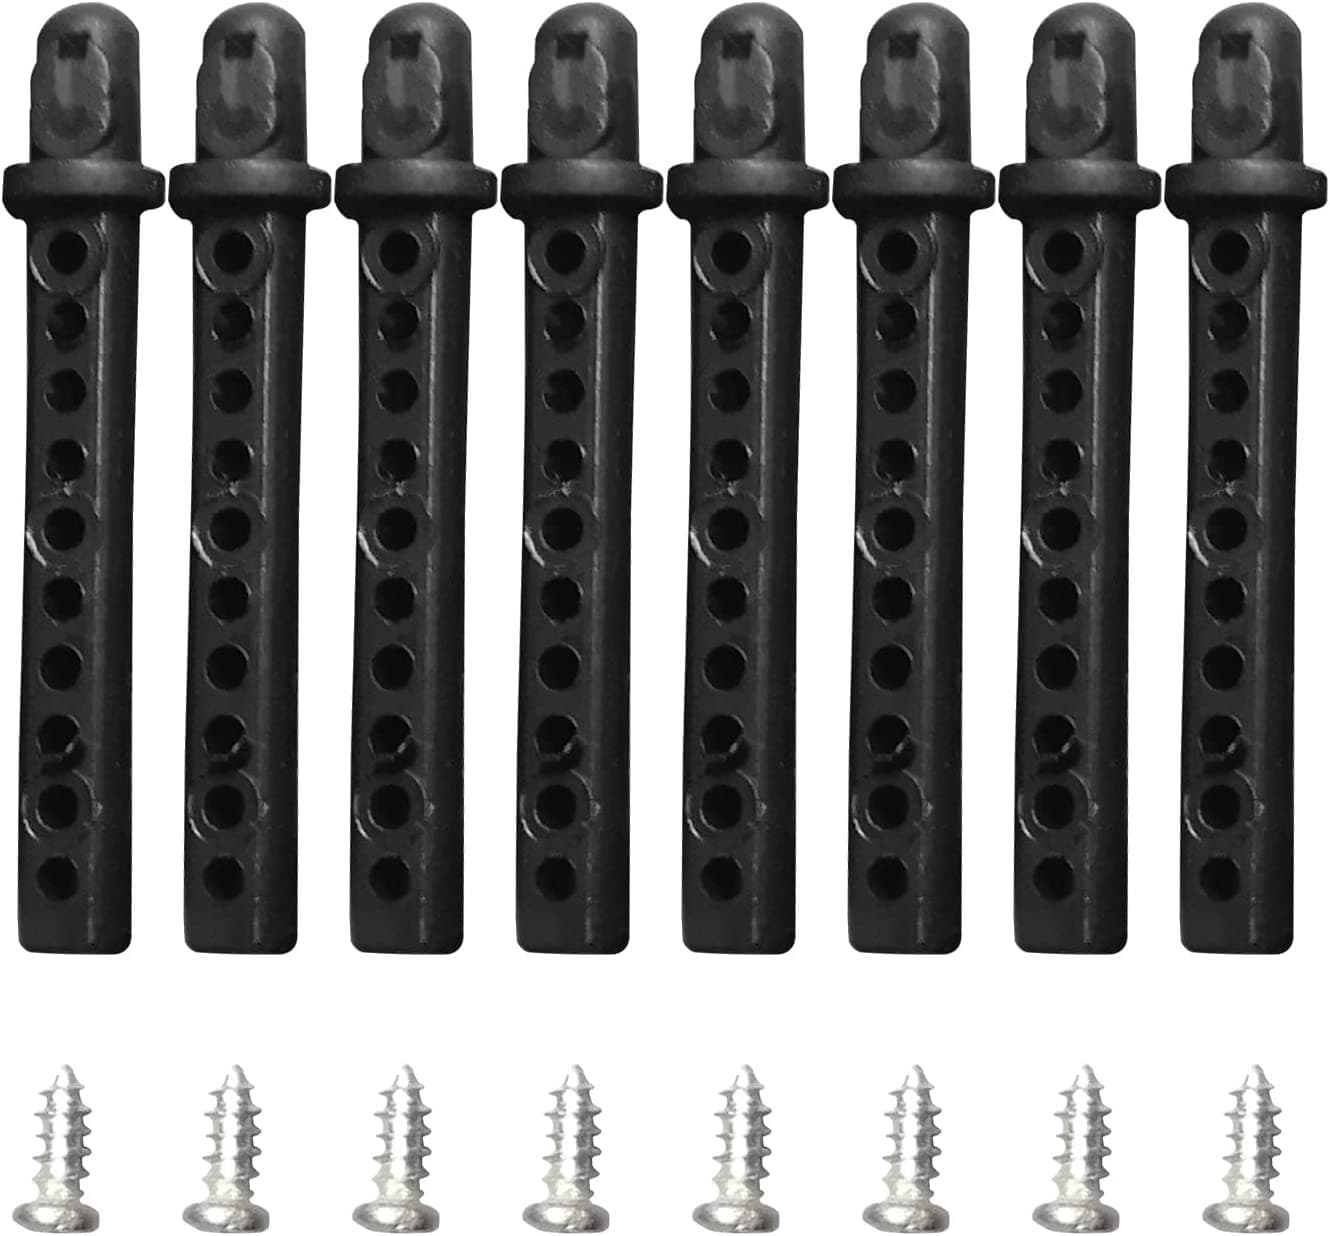 8 Pieces Plastic RC Car Body Post Mounts for RC Drfiting Car 1/14.